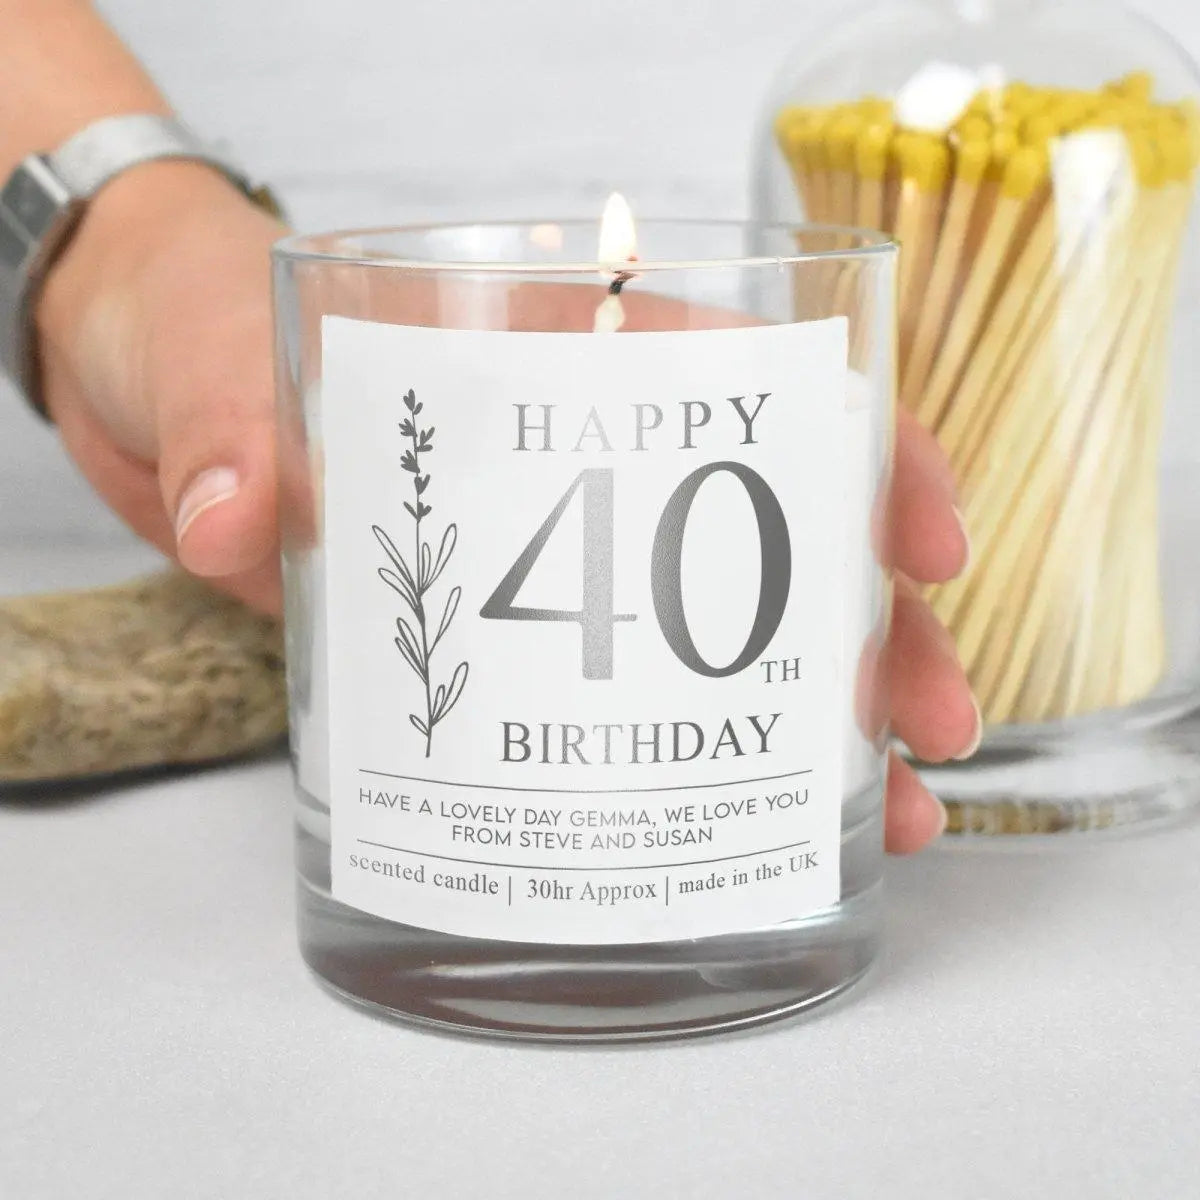 Personalised Age Birthday Candle, Personalized Birthday Candle Gift, Age Birthday Gift, Birthday Present, For Her, Birthday Celebration, - Amy Lucy